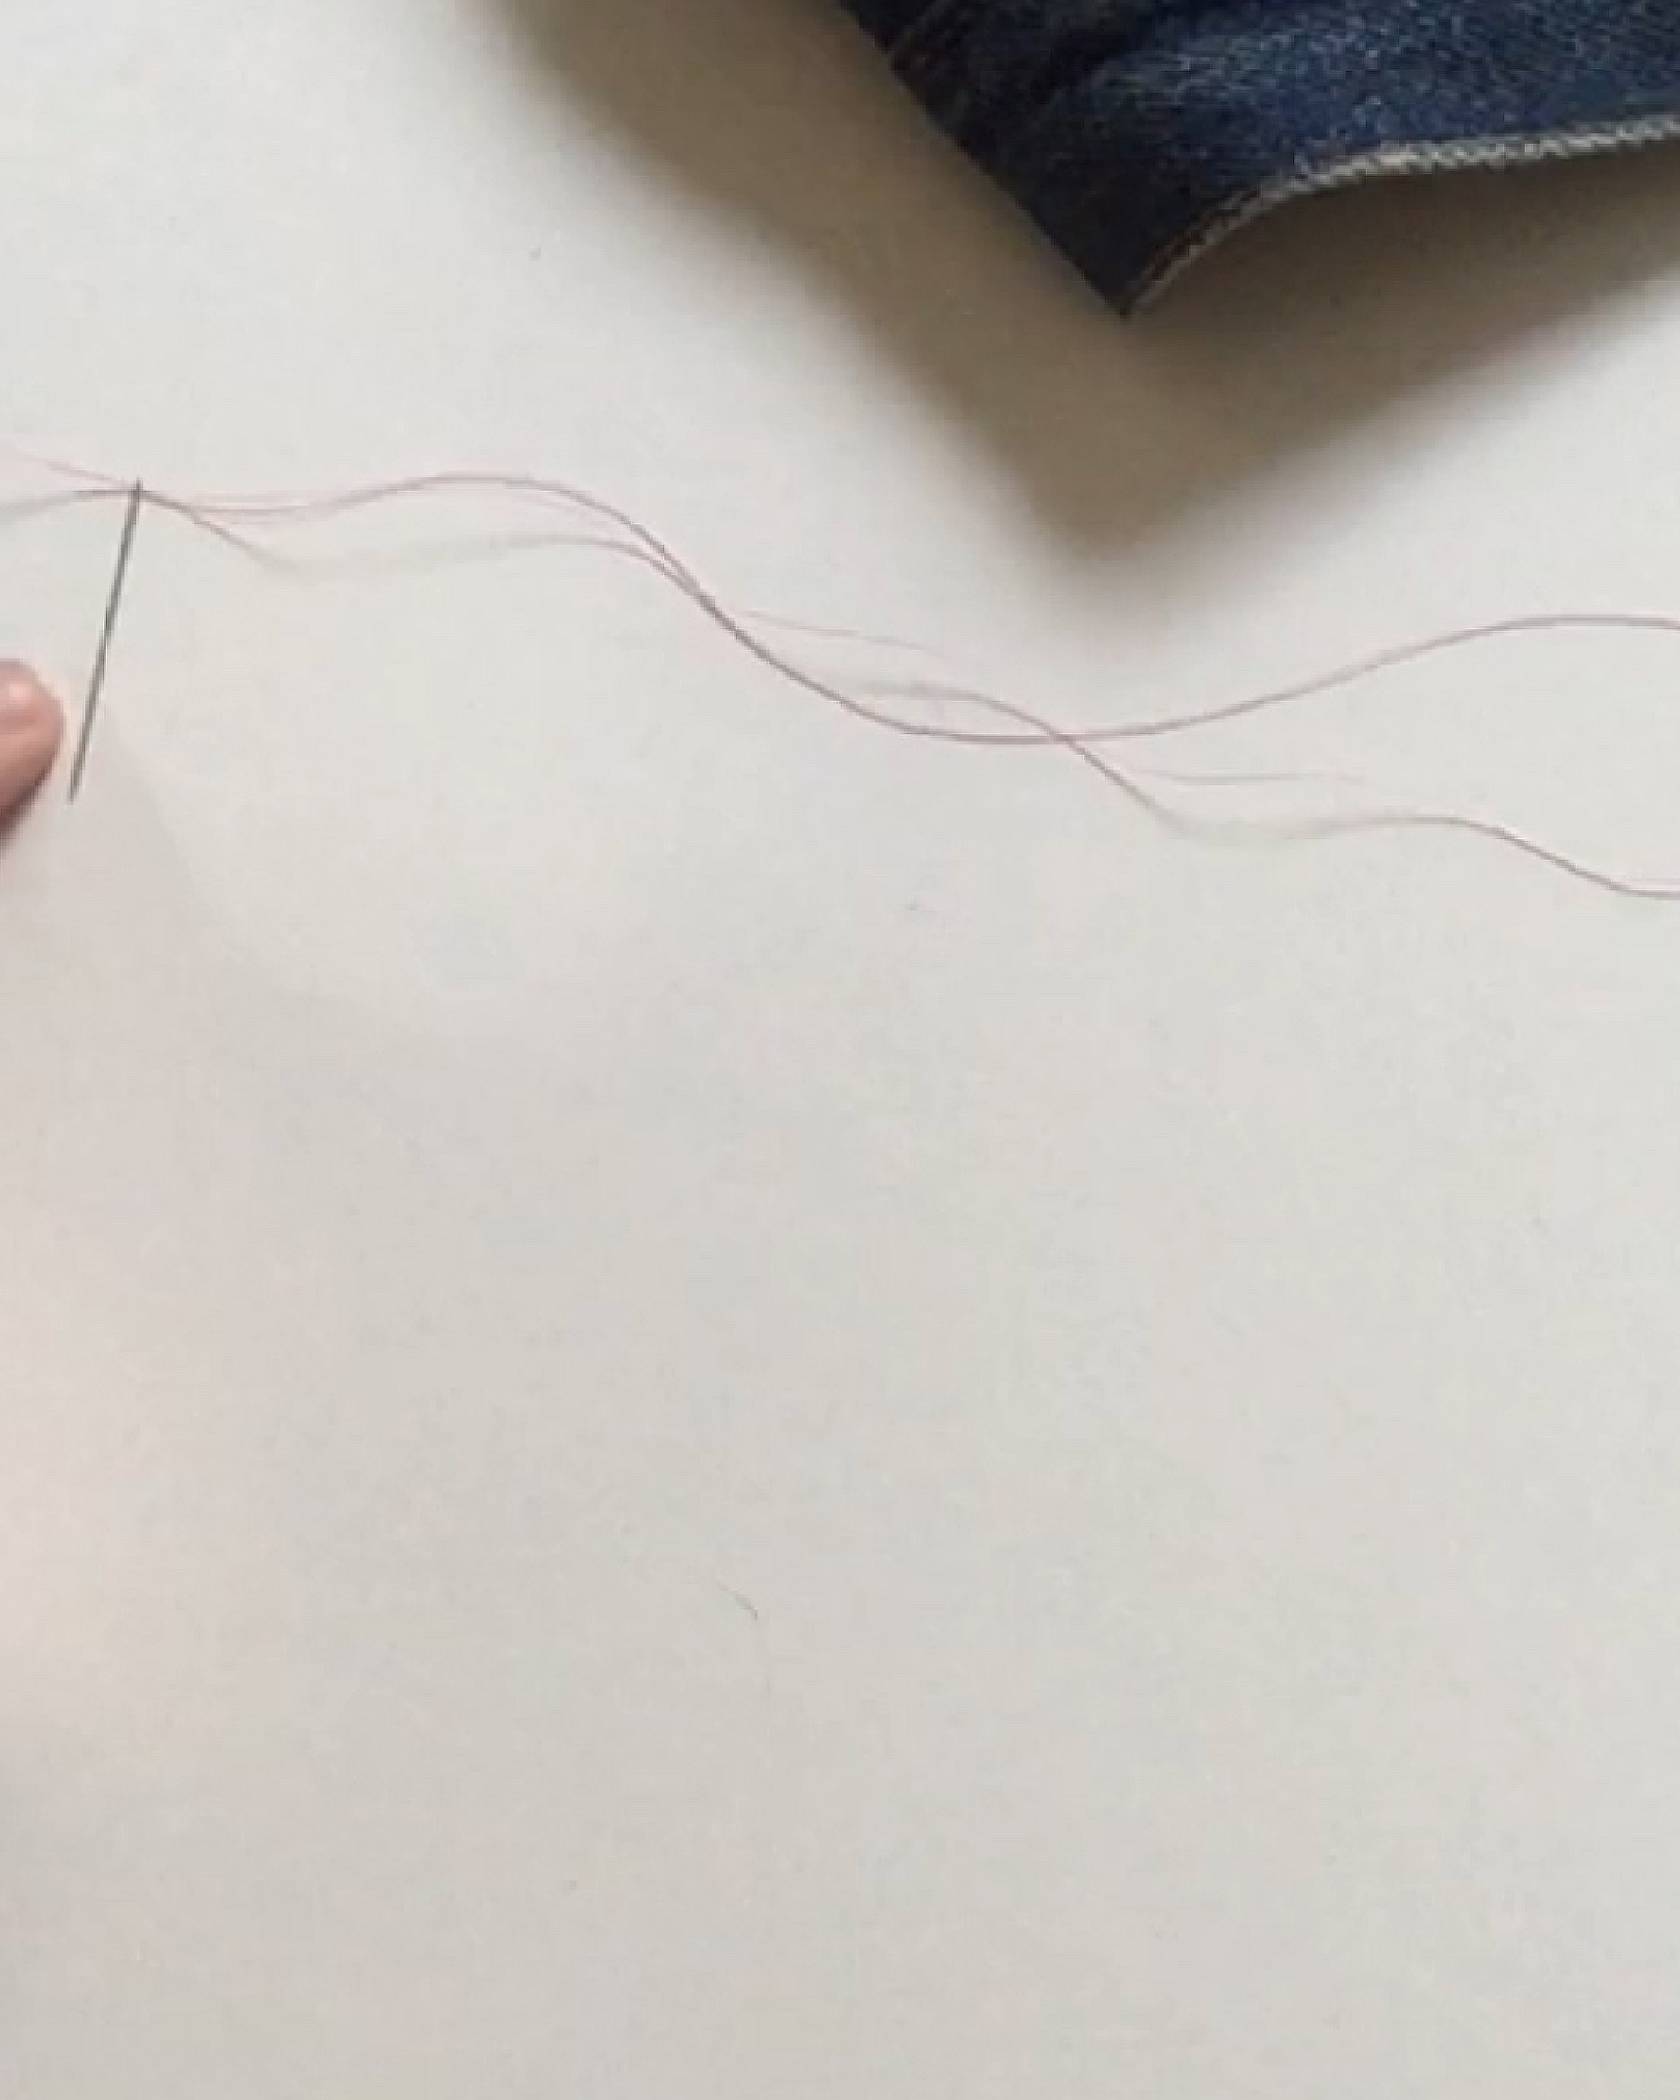 Image of a needle and thread to show how to thread the needle through and leaving a loop on one end.